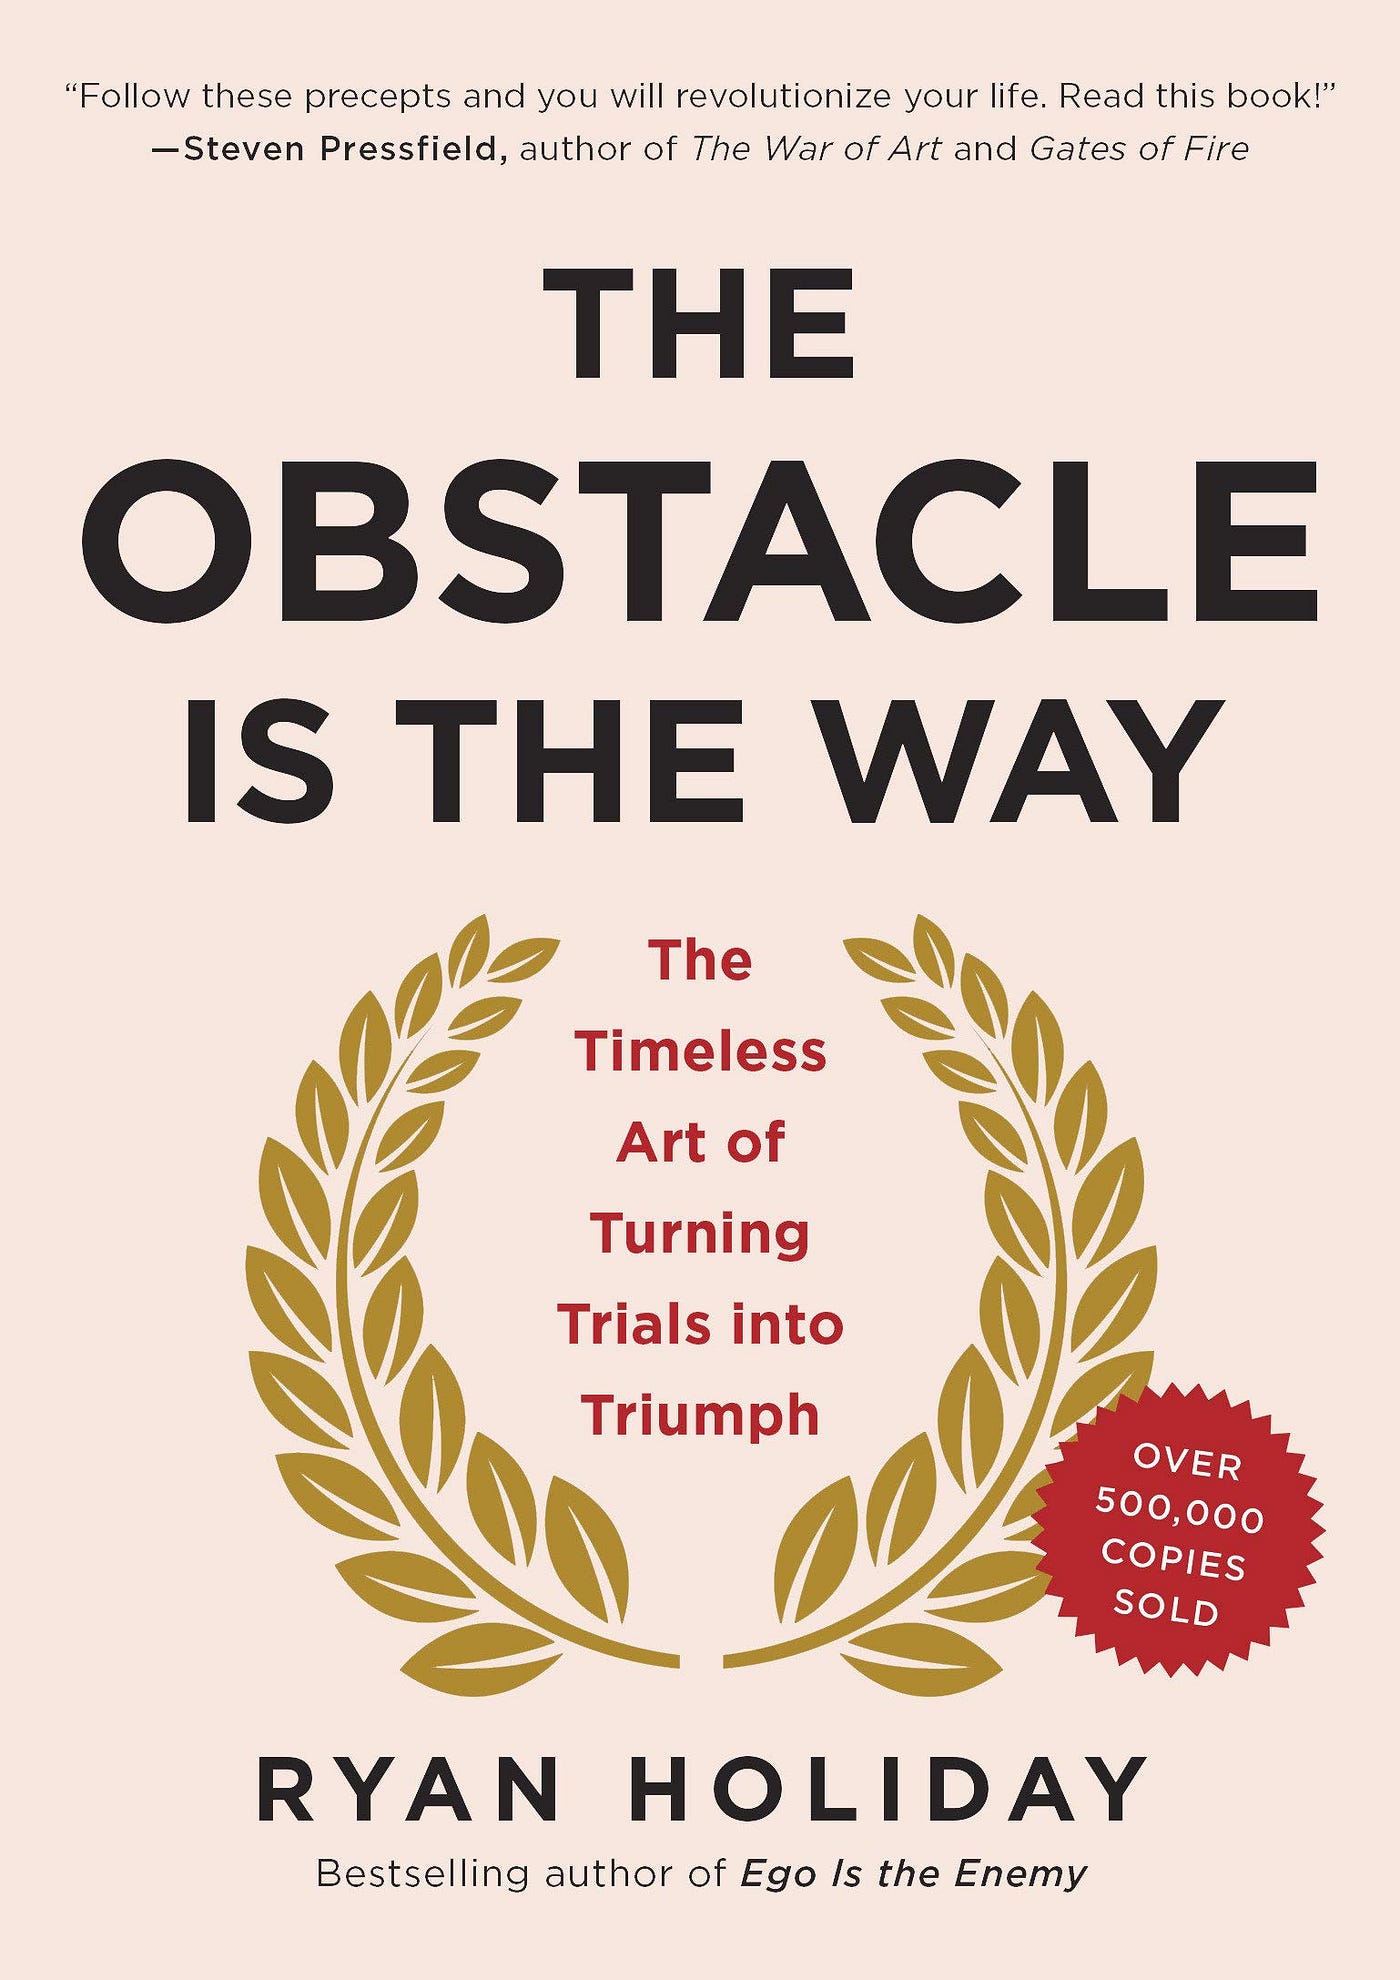 L'obstacle est le chemin(French version) Free Summary by Ryan Holiday